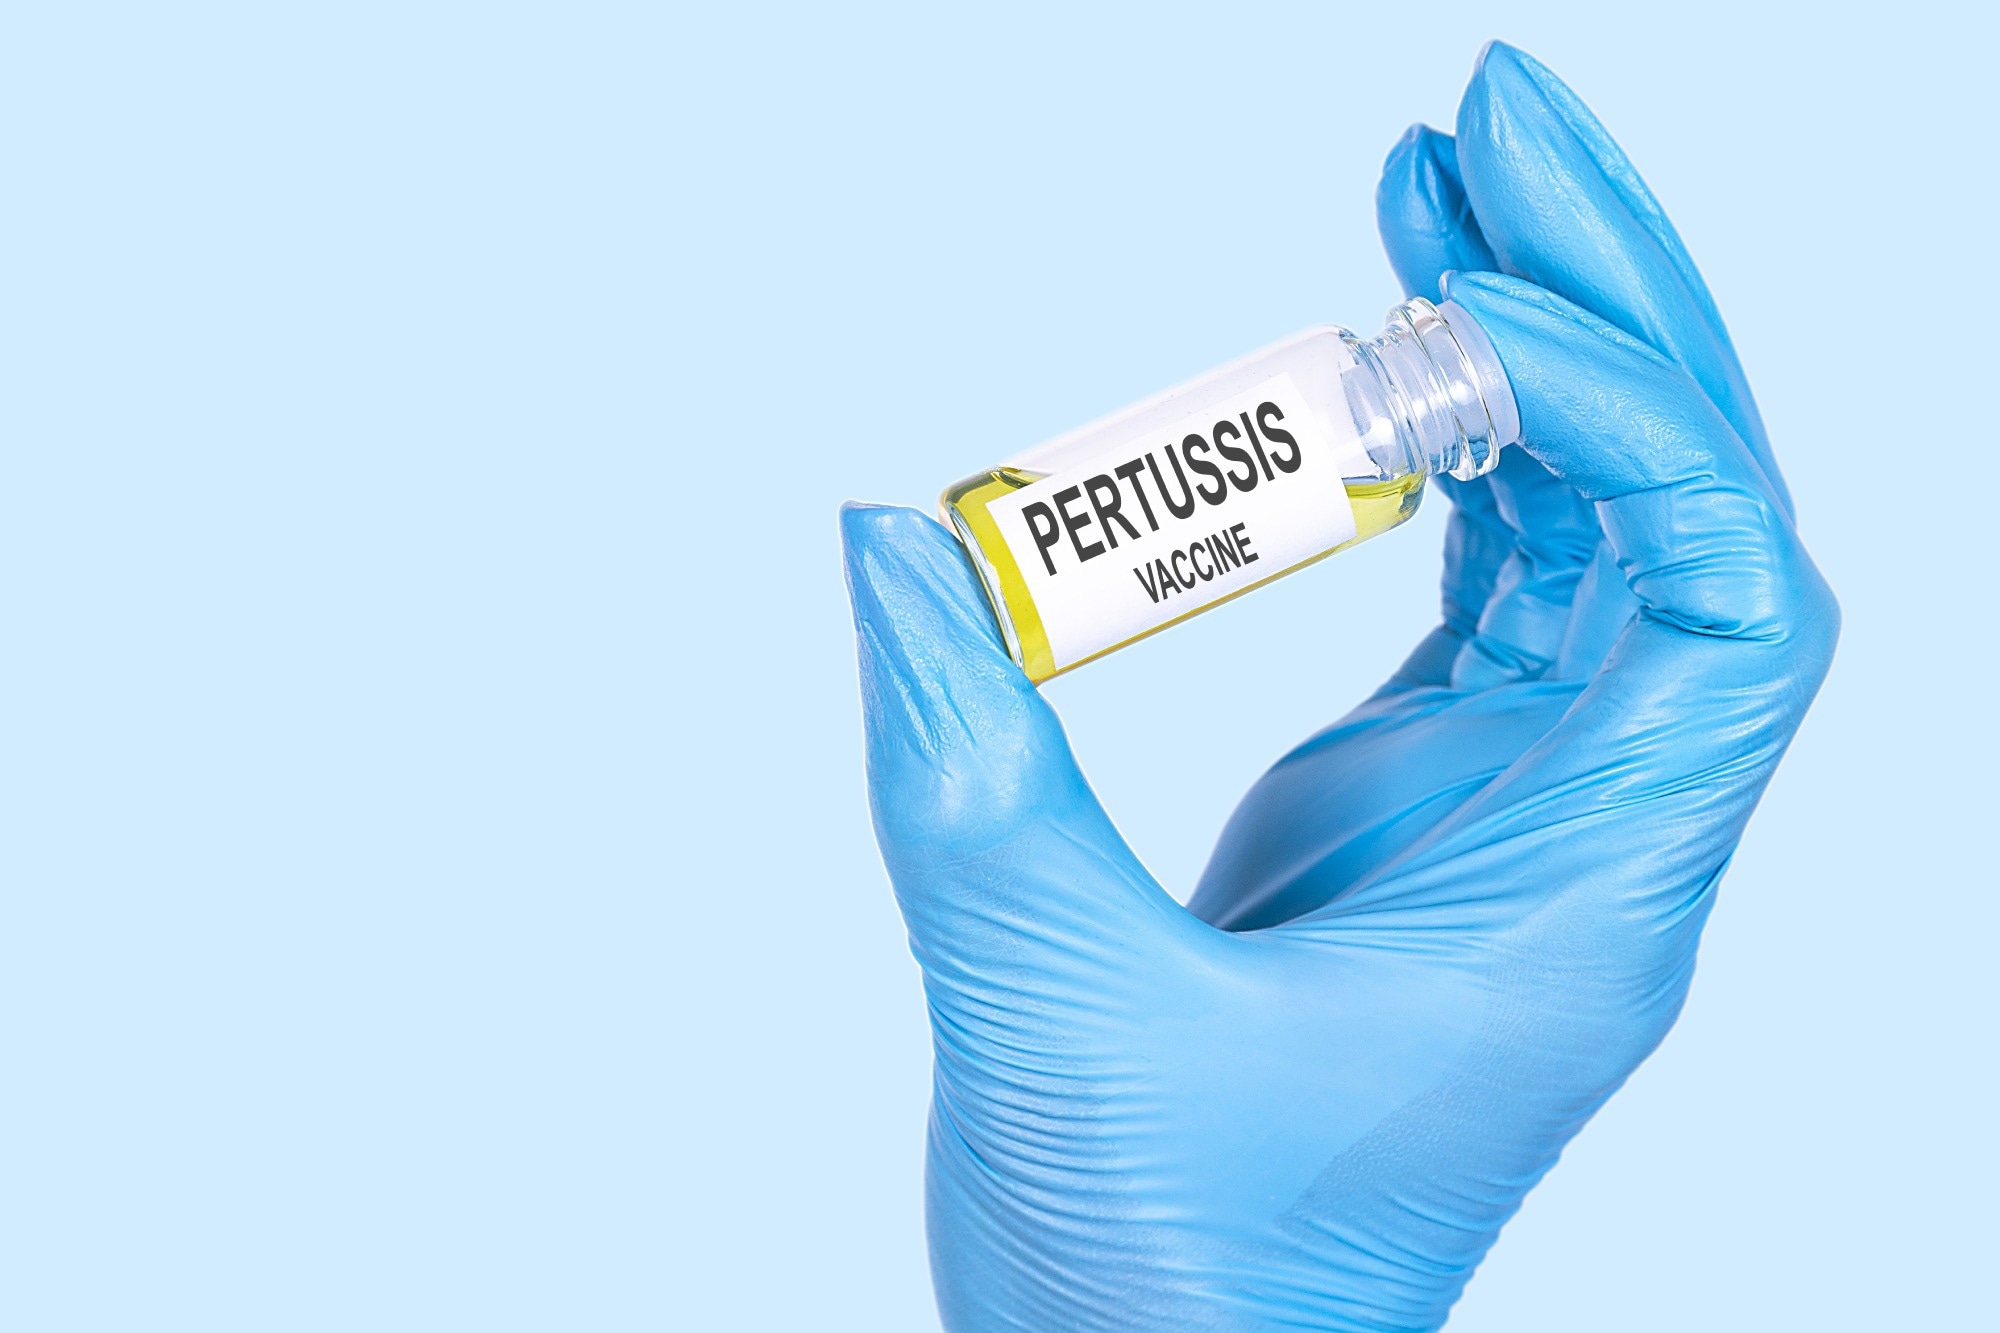 Study: Immune response to pertussis vaccine in COPD patients. Image Credit: VadiFuoco/Shutterstock.com